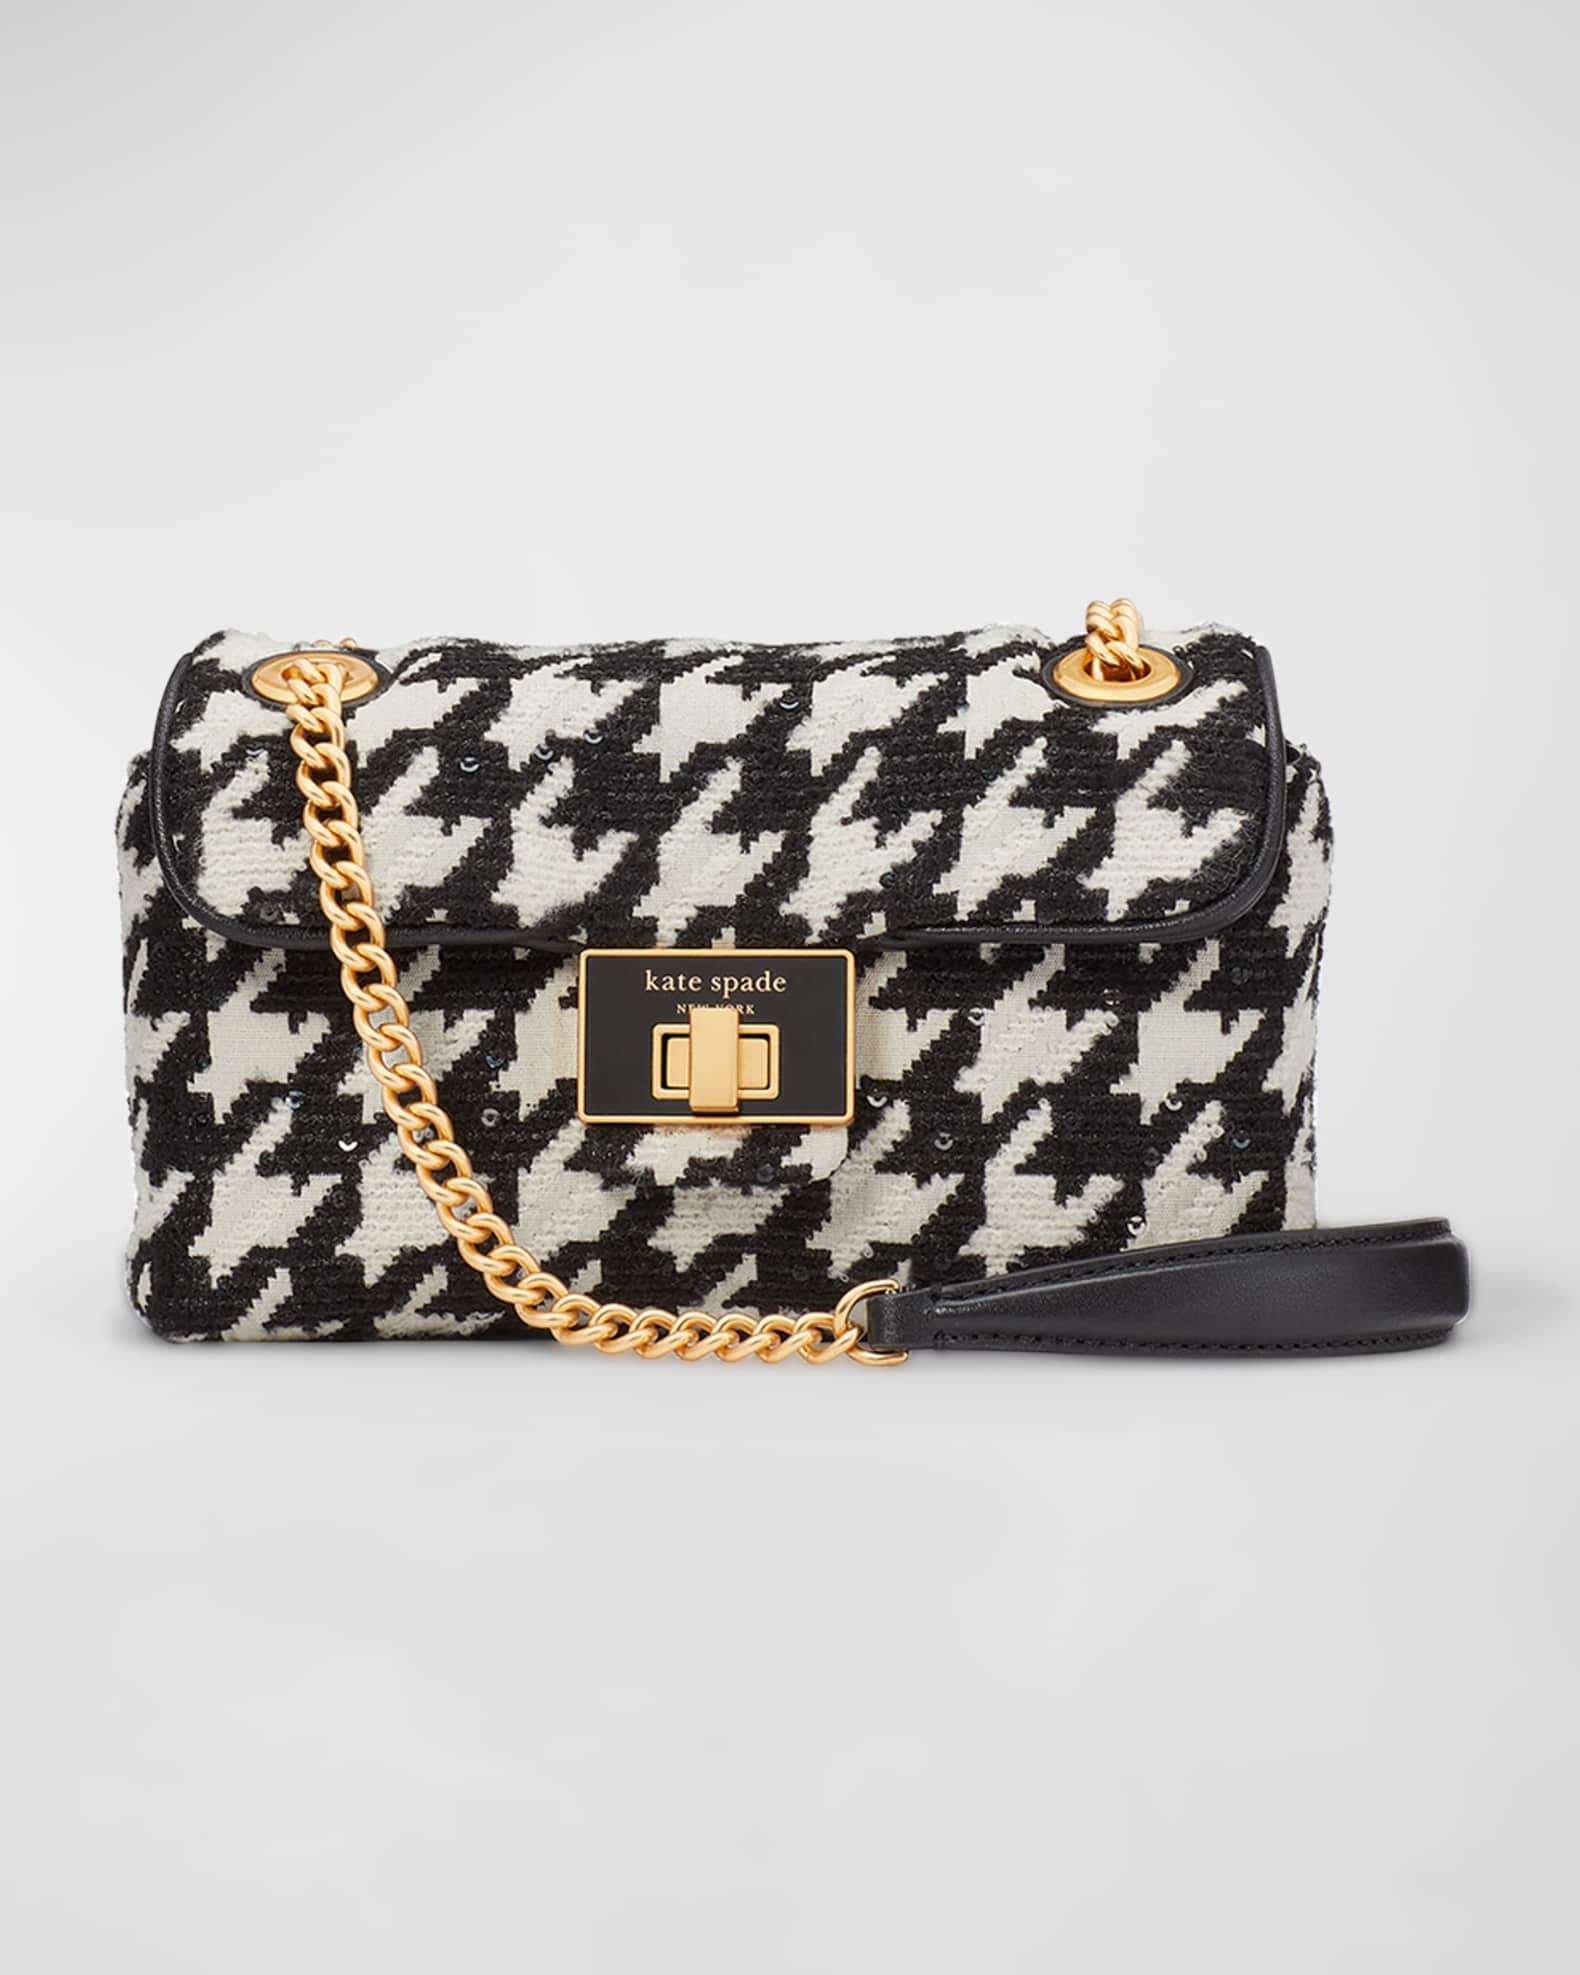 kate spade new york evelyn small sequin houndstooth crossbody bag